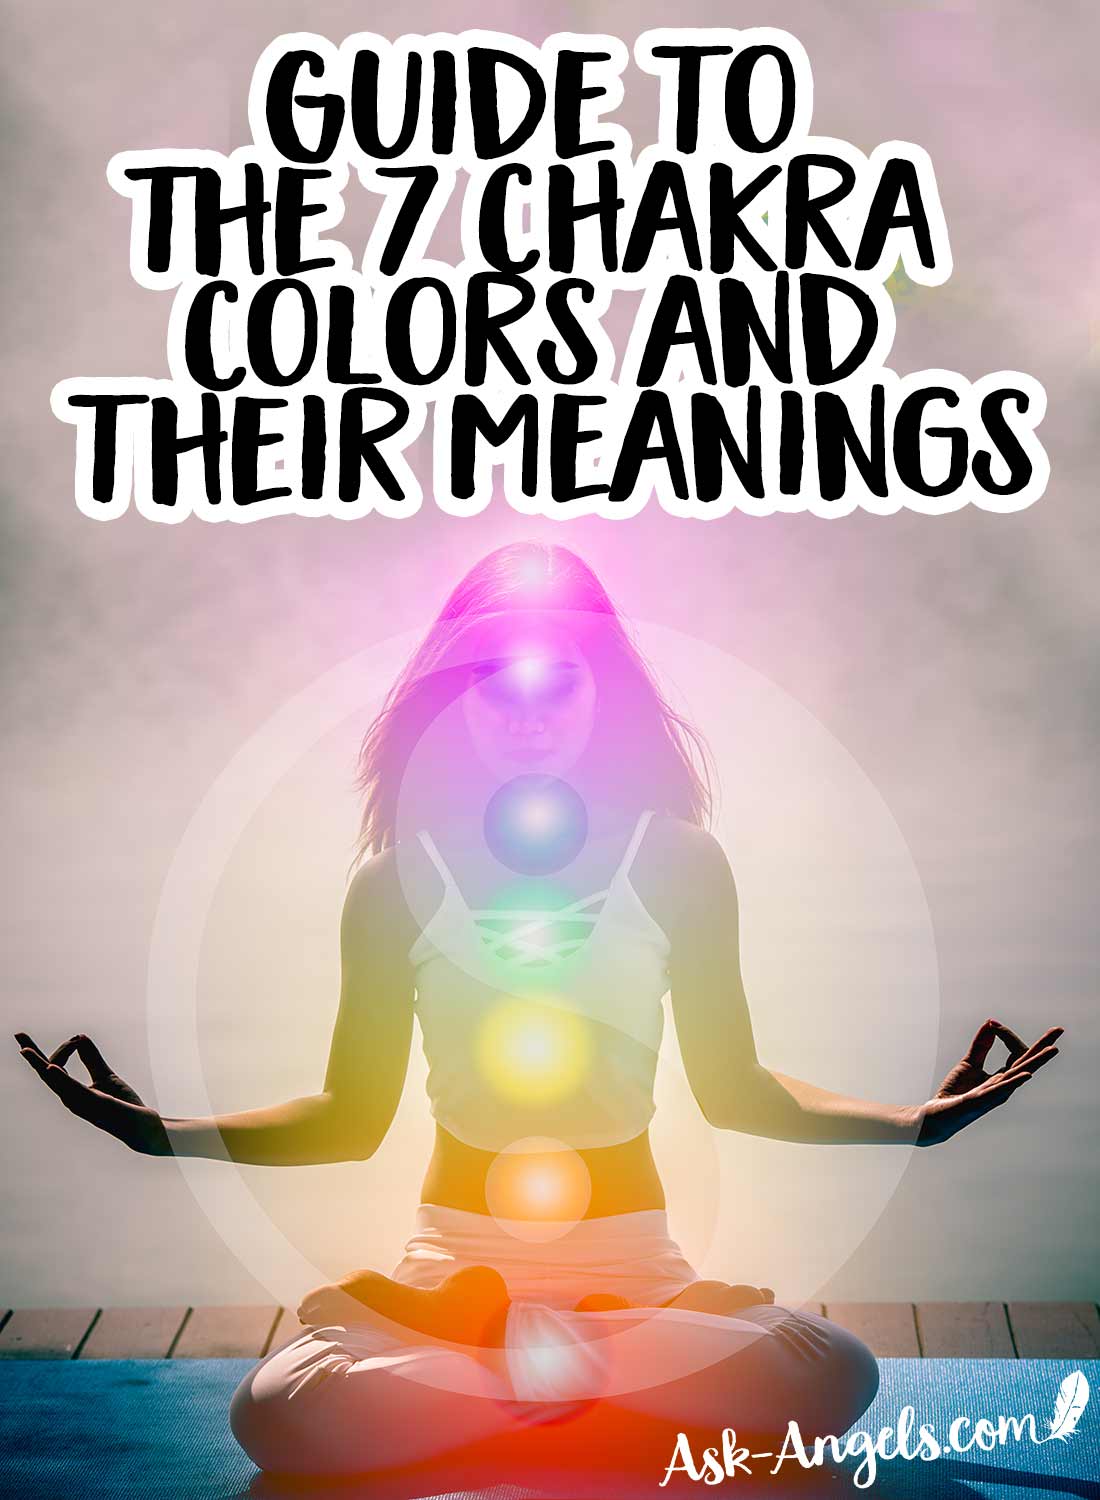 Guide to The 7 Chakra Colors and their Meanings